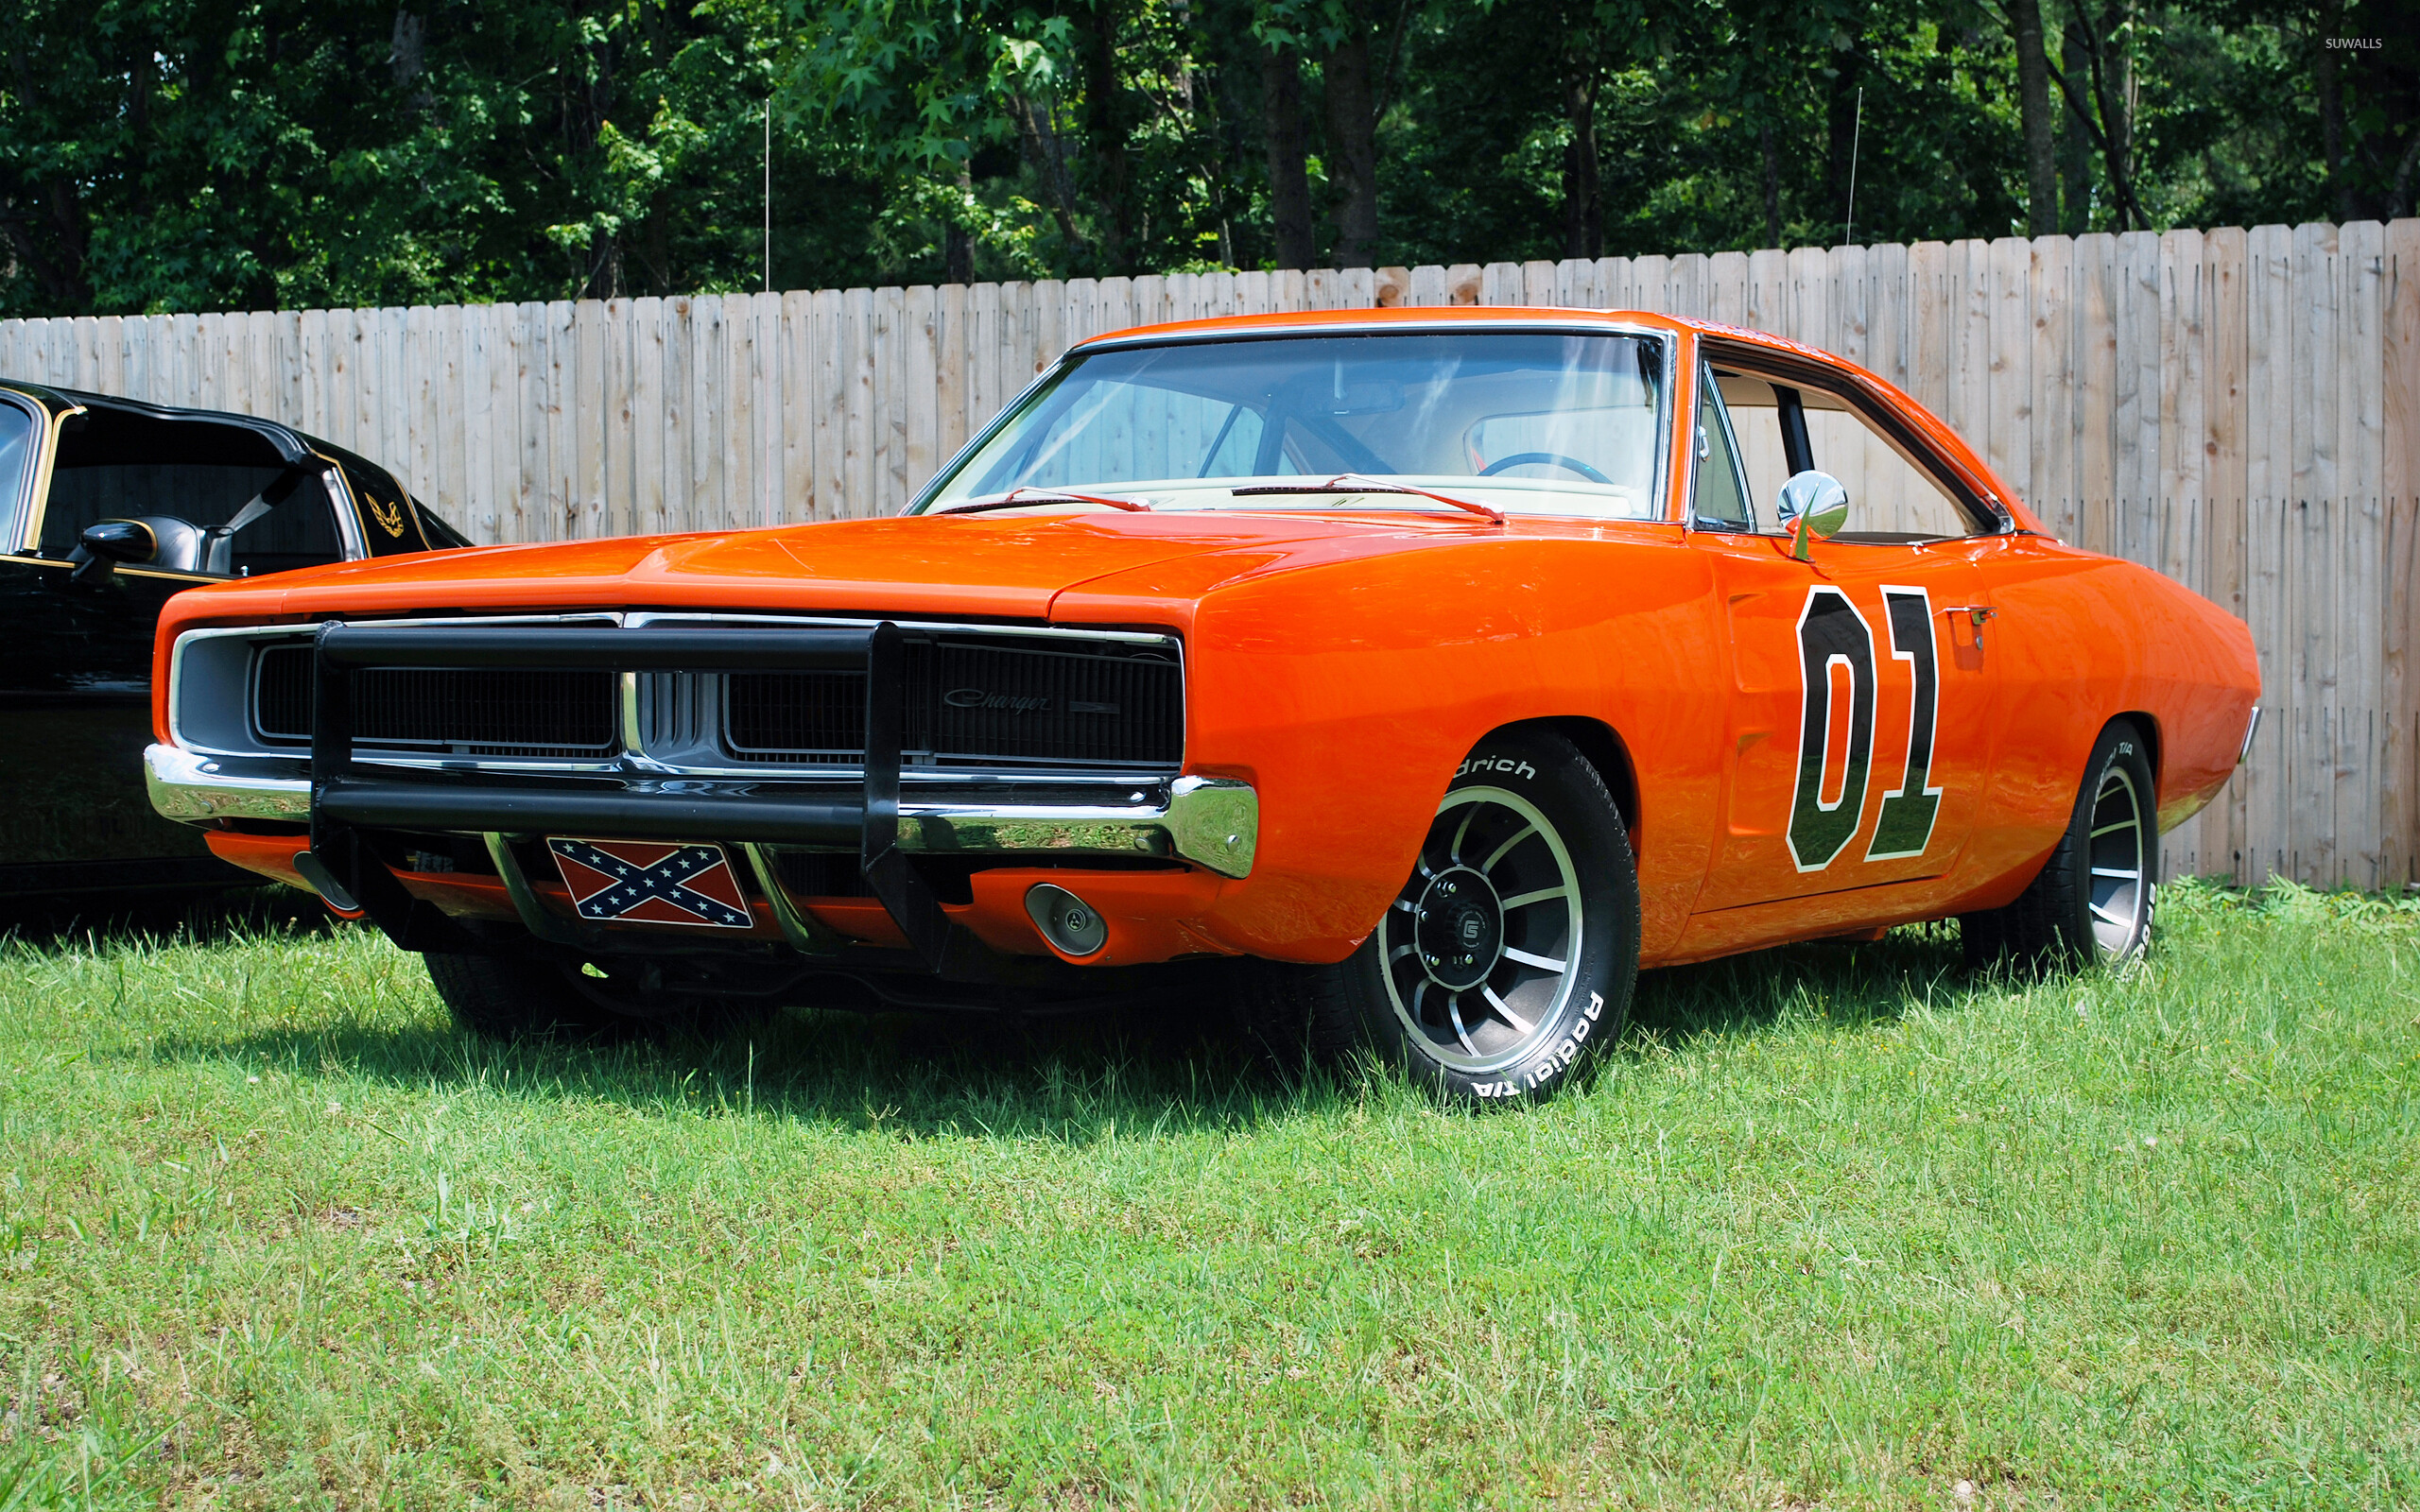 General Lee Car: An orange 1969 Dodge Charger, The television series The Dukes of Hazzard, The Duke boys. 2560x1600 HD Wallpaper.